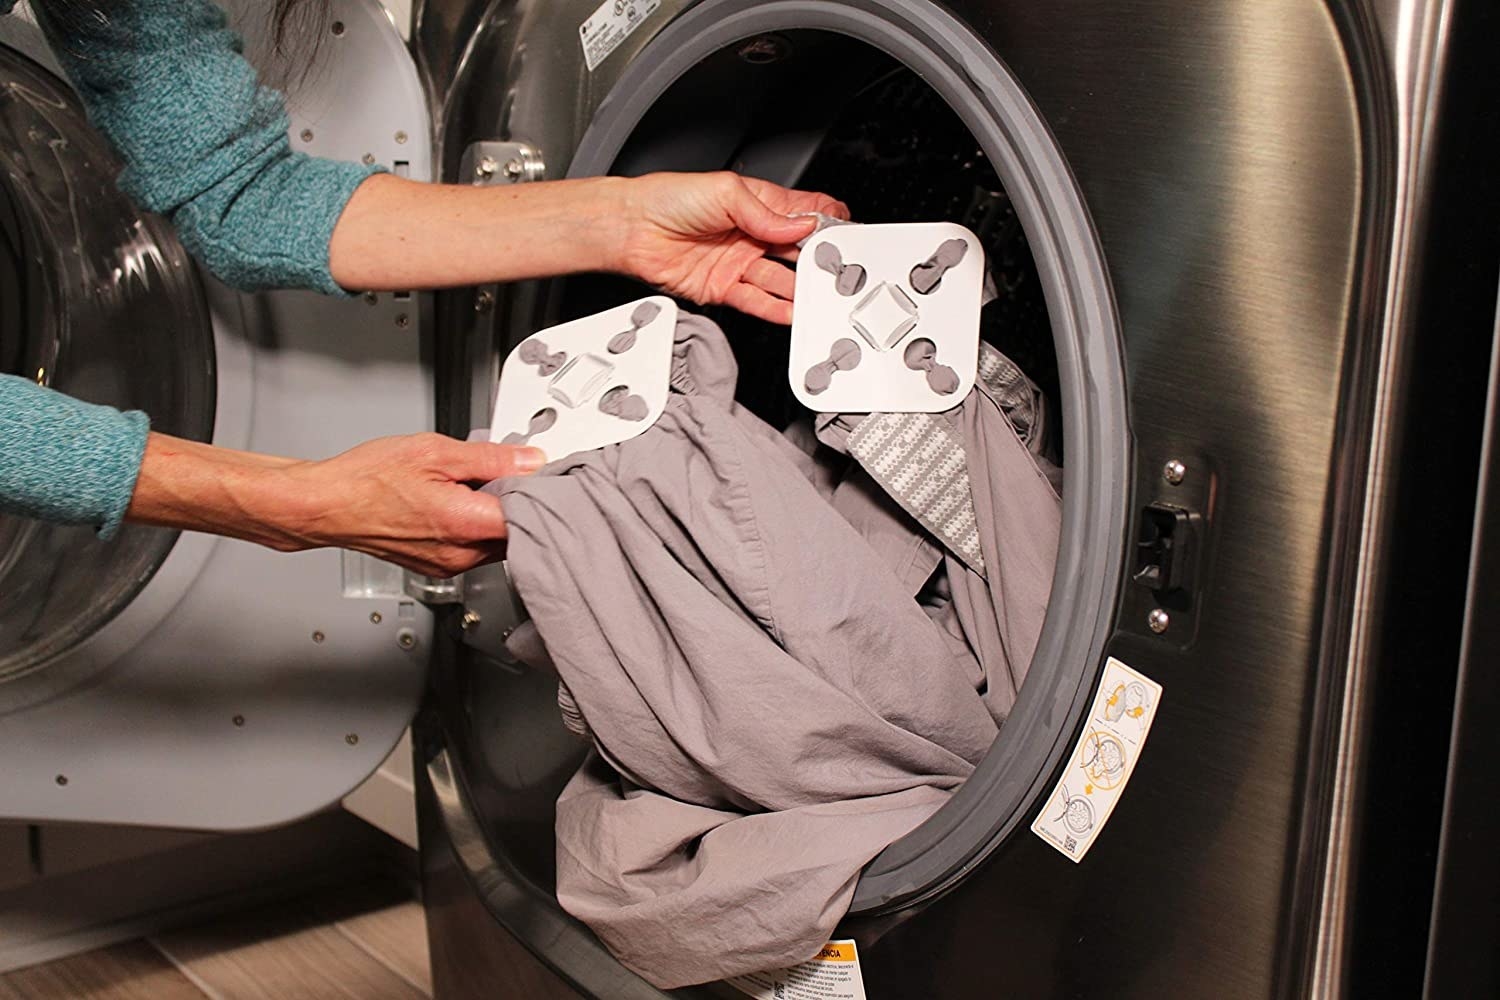 20 Helpful Products For People Who Don’t Have Easy Access To A Laundry Machine